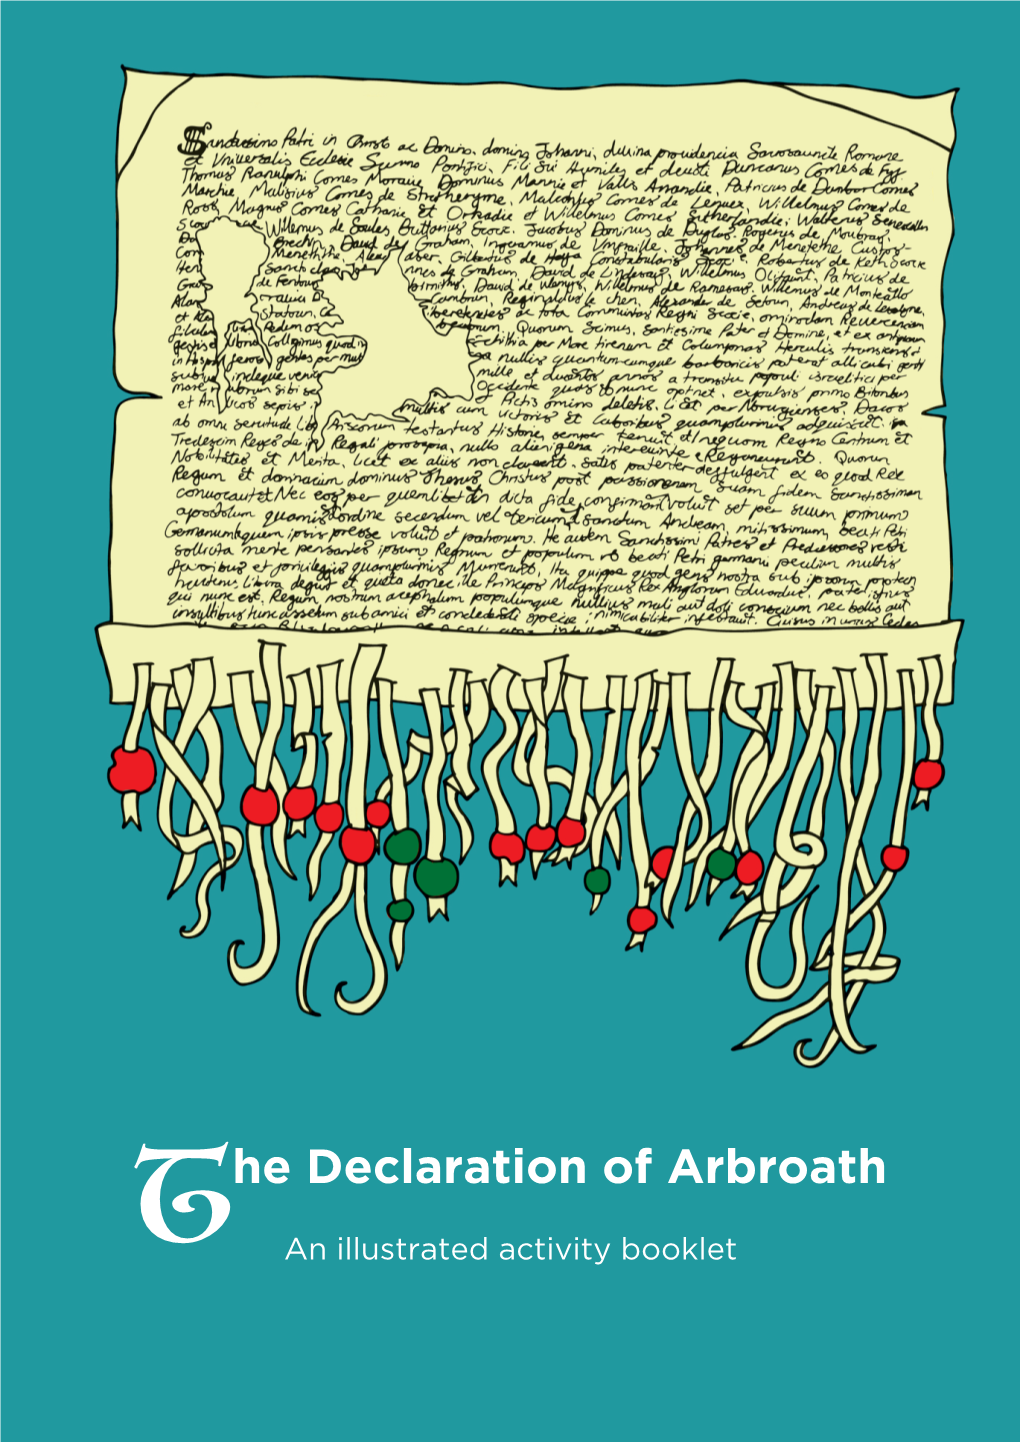 The Declaration of Arbroath: an Illustrated Activity Booklet